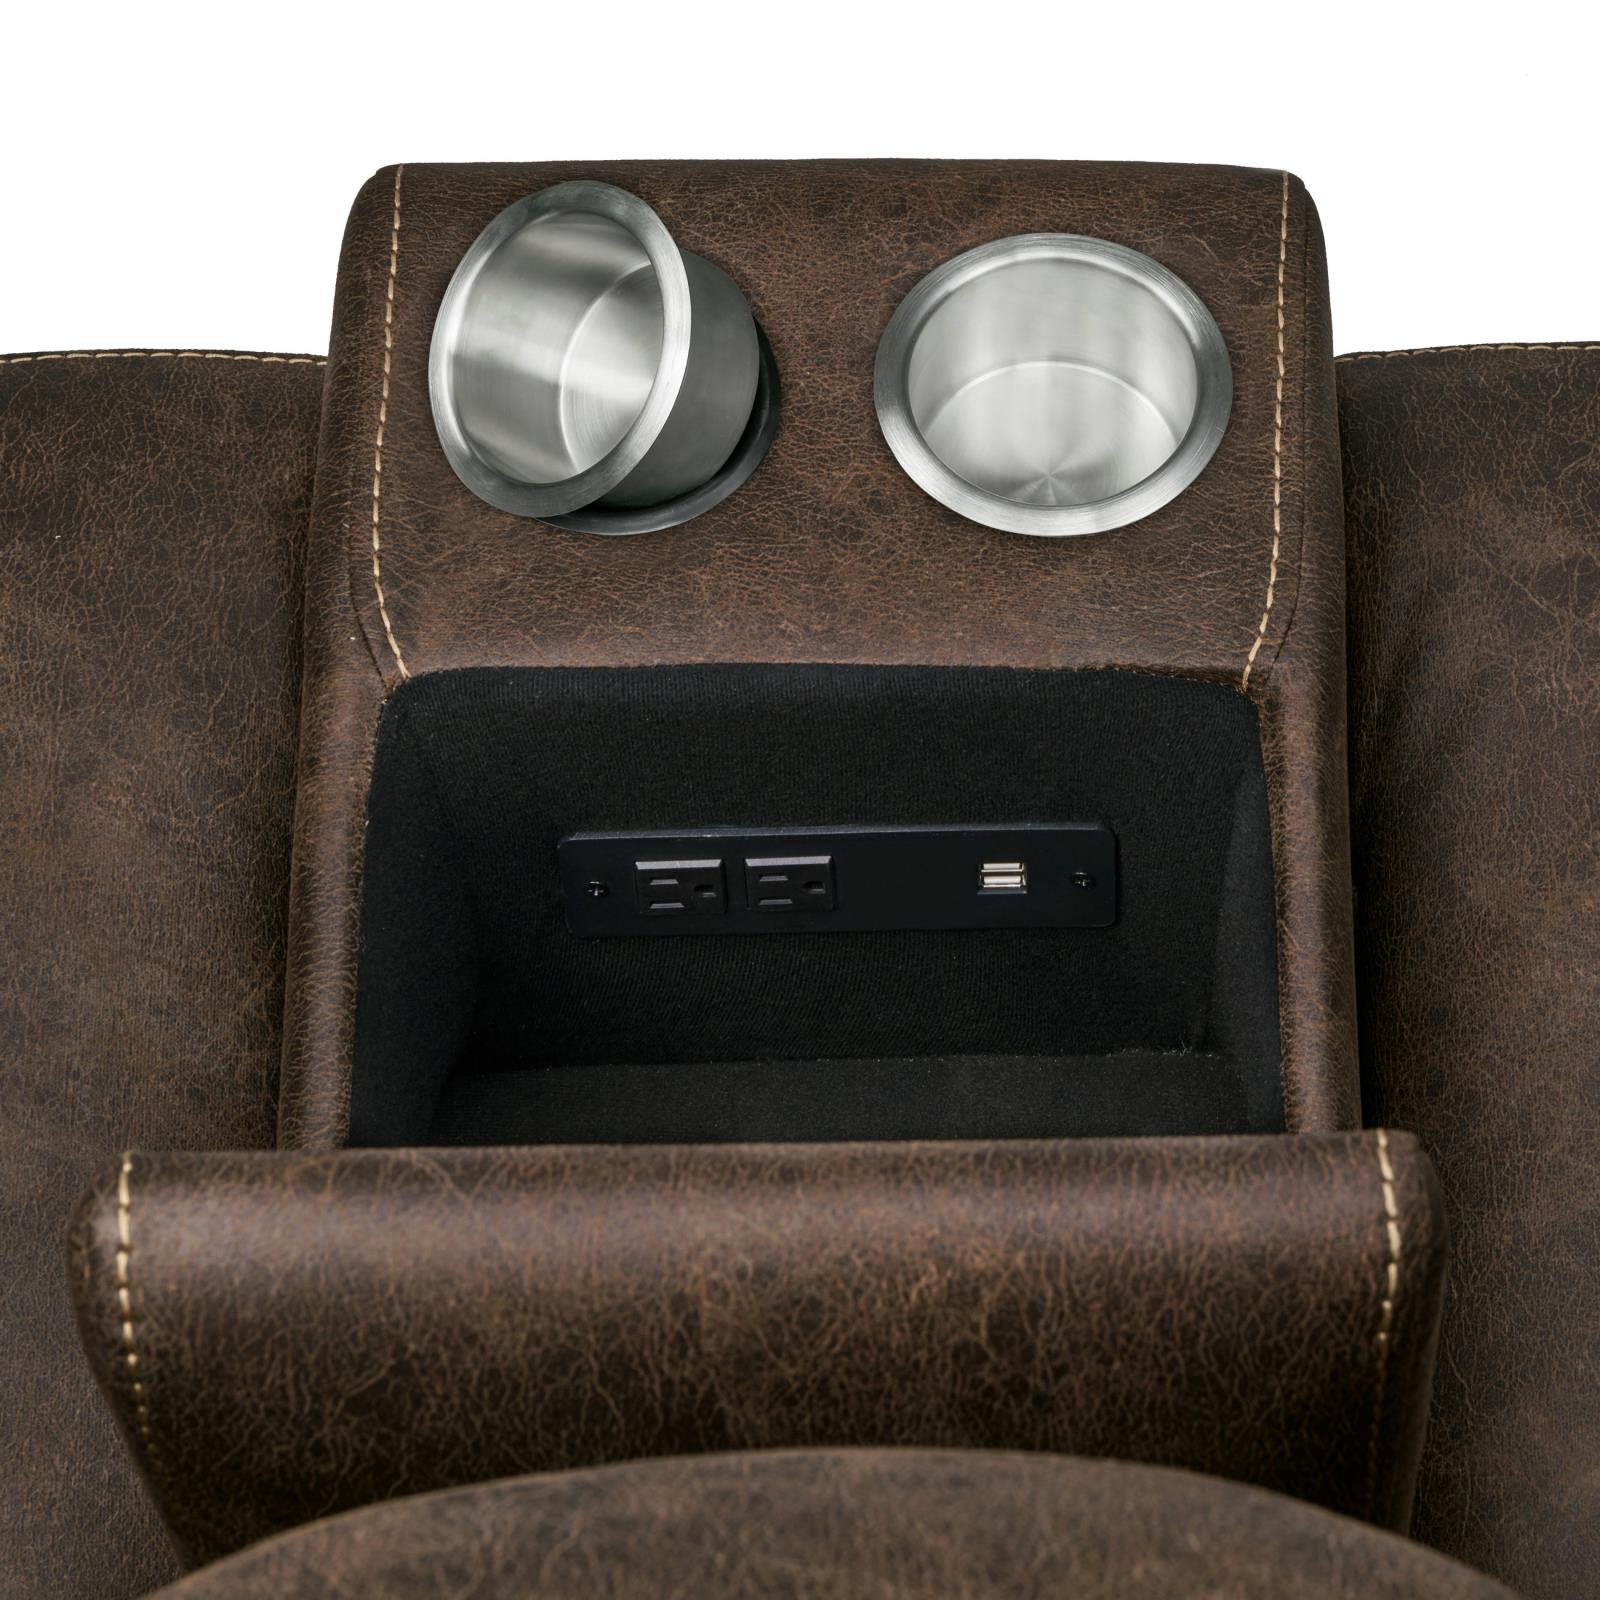 Brixton Glider Loveseat with Cup Holders Buckskin Brown - What A Room